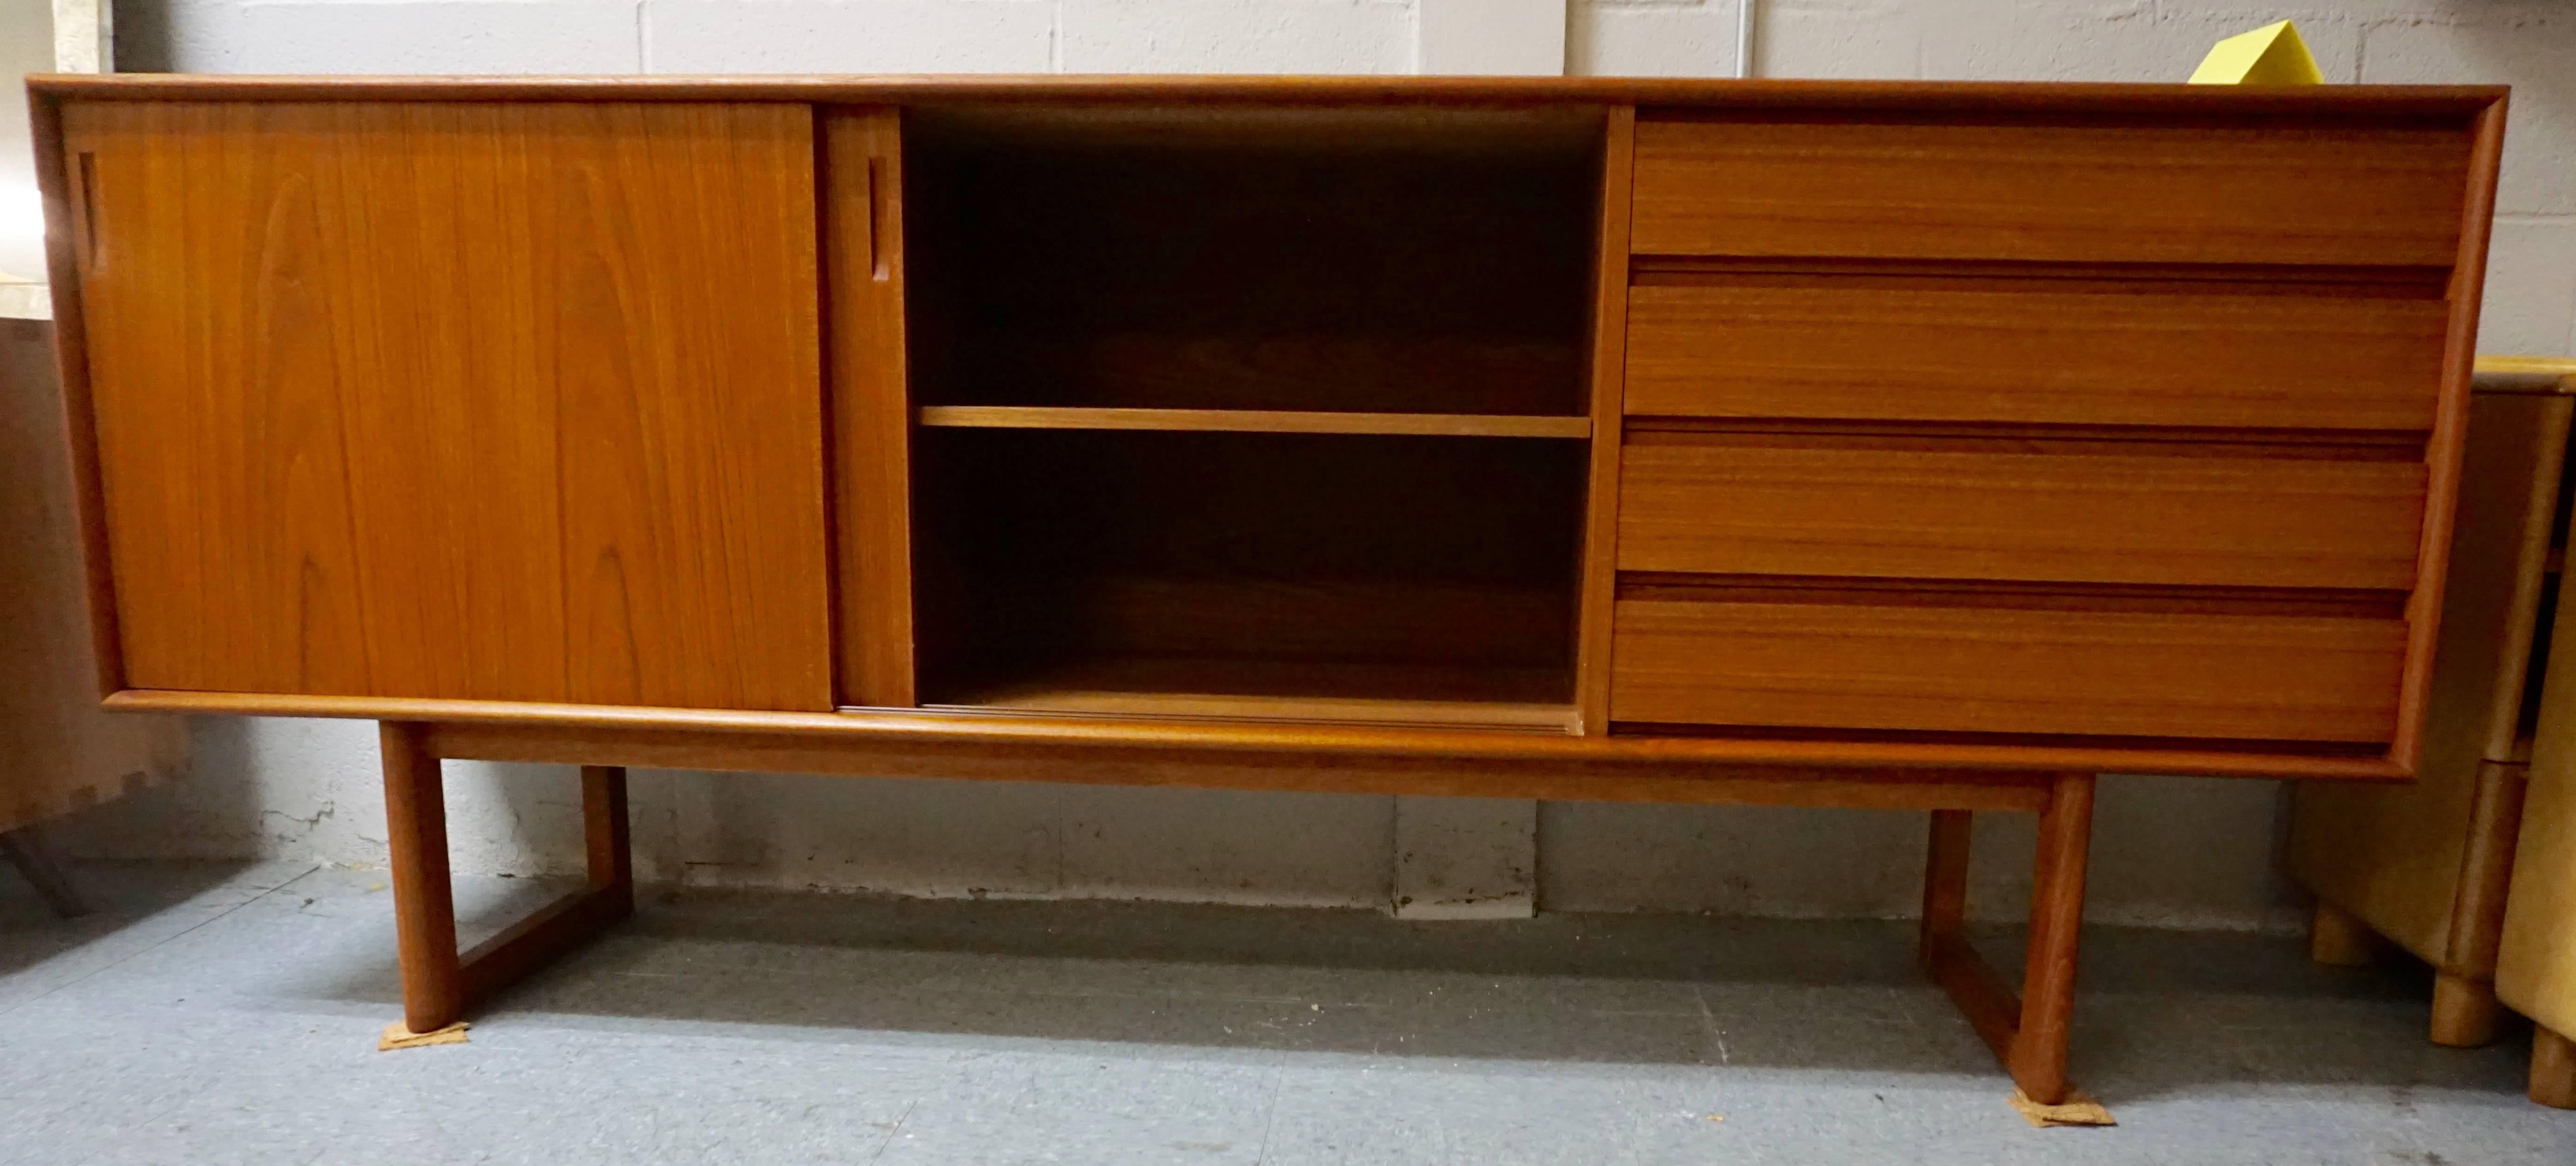 Mid-20th Century Danish Teak Credenza with Two Doors and Drawers